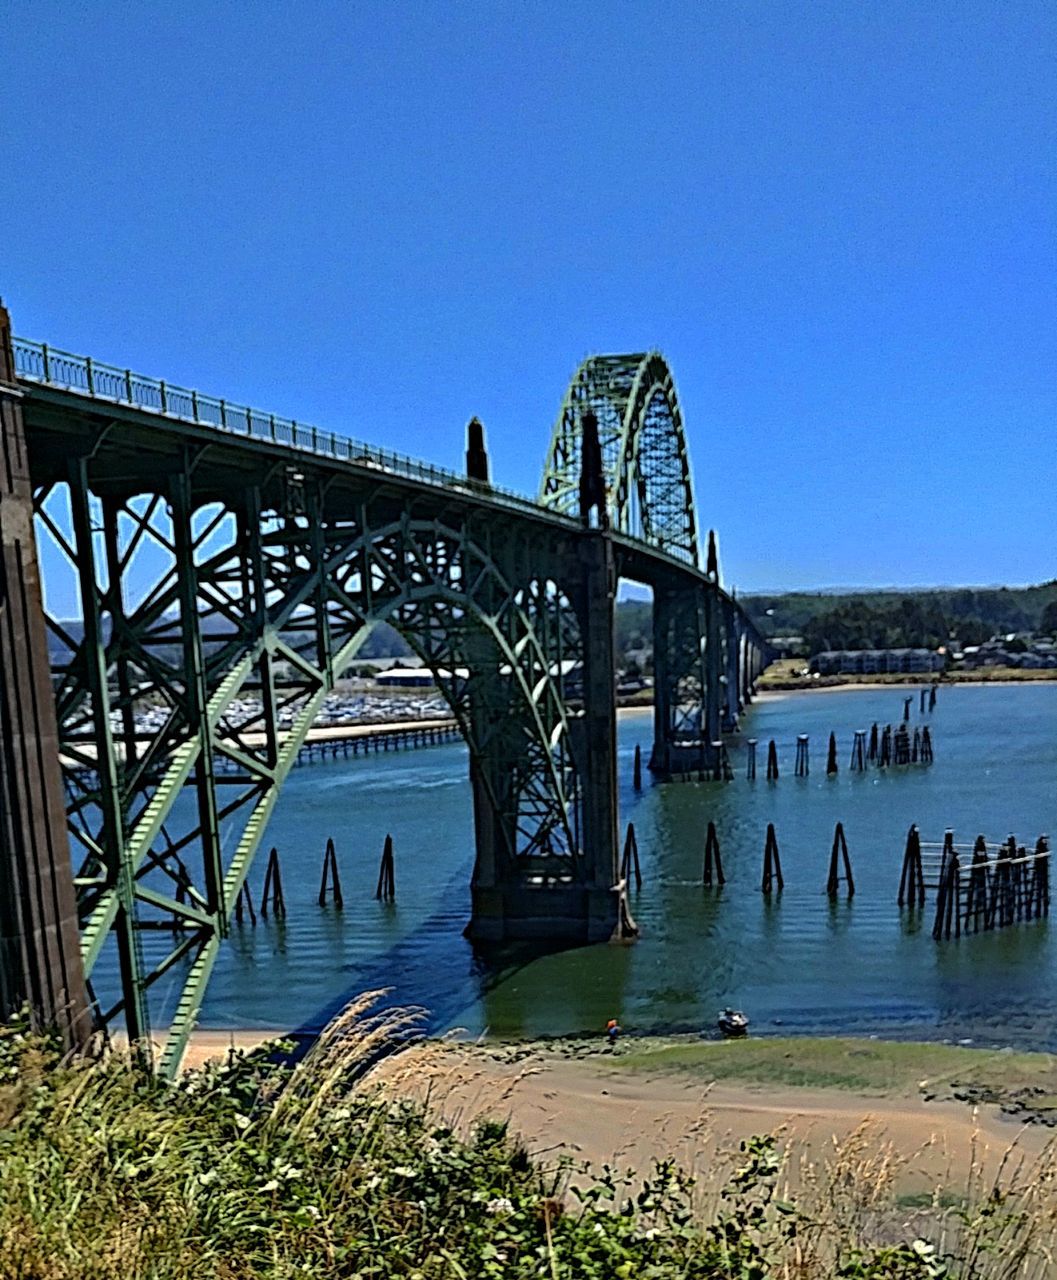 VIEW OF BRIDGE OVER RIVER AGAINST CLEAR BLUE SKY